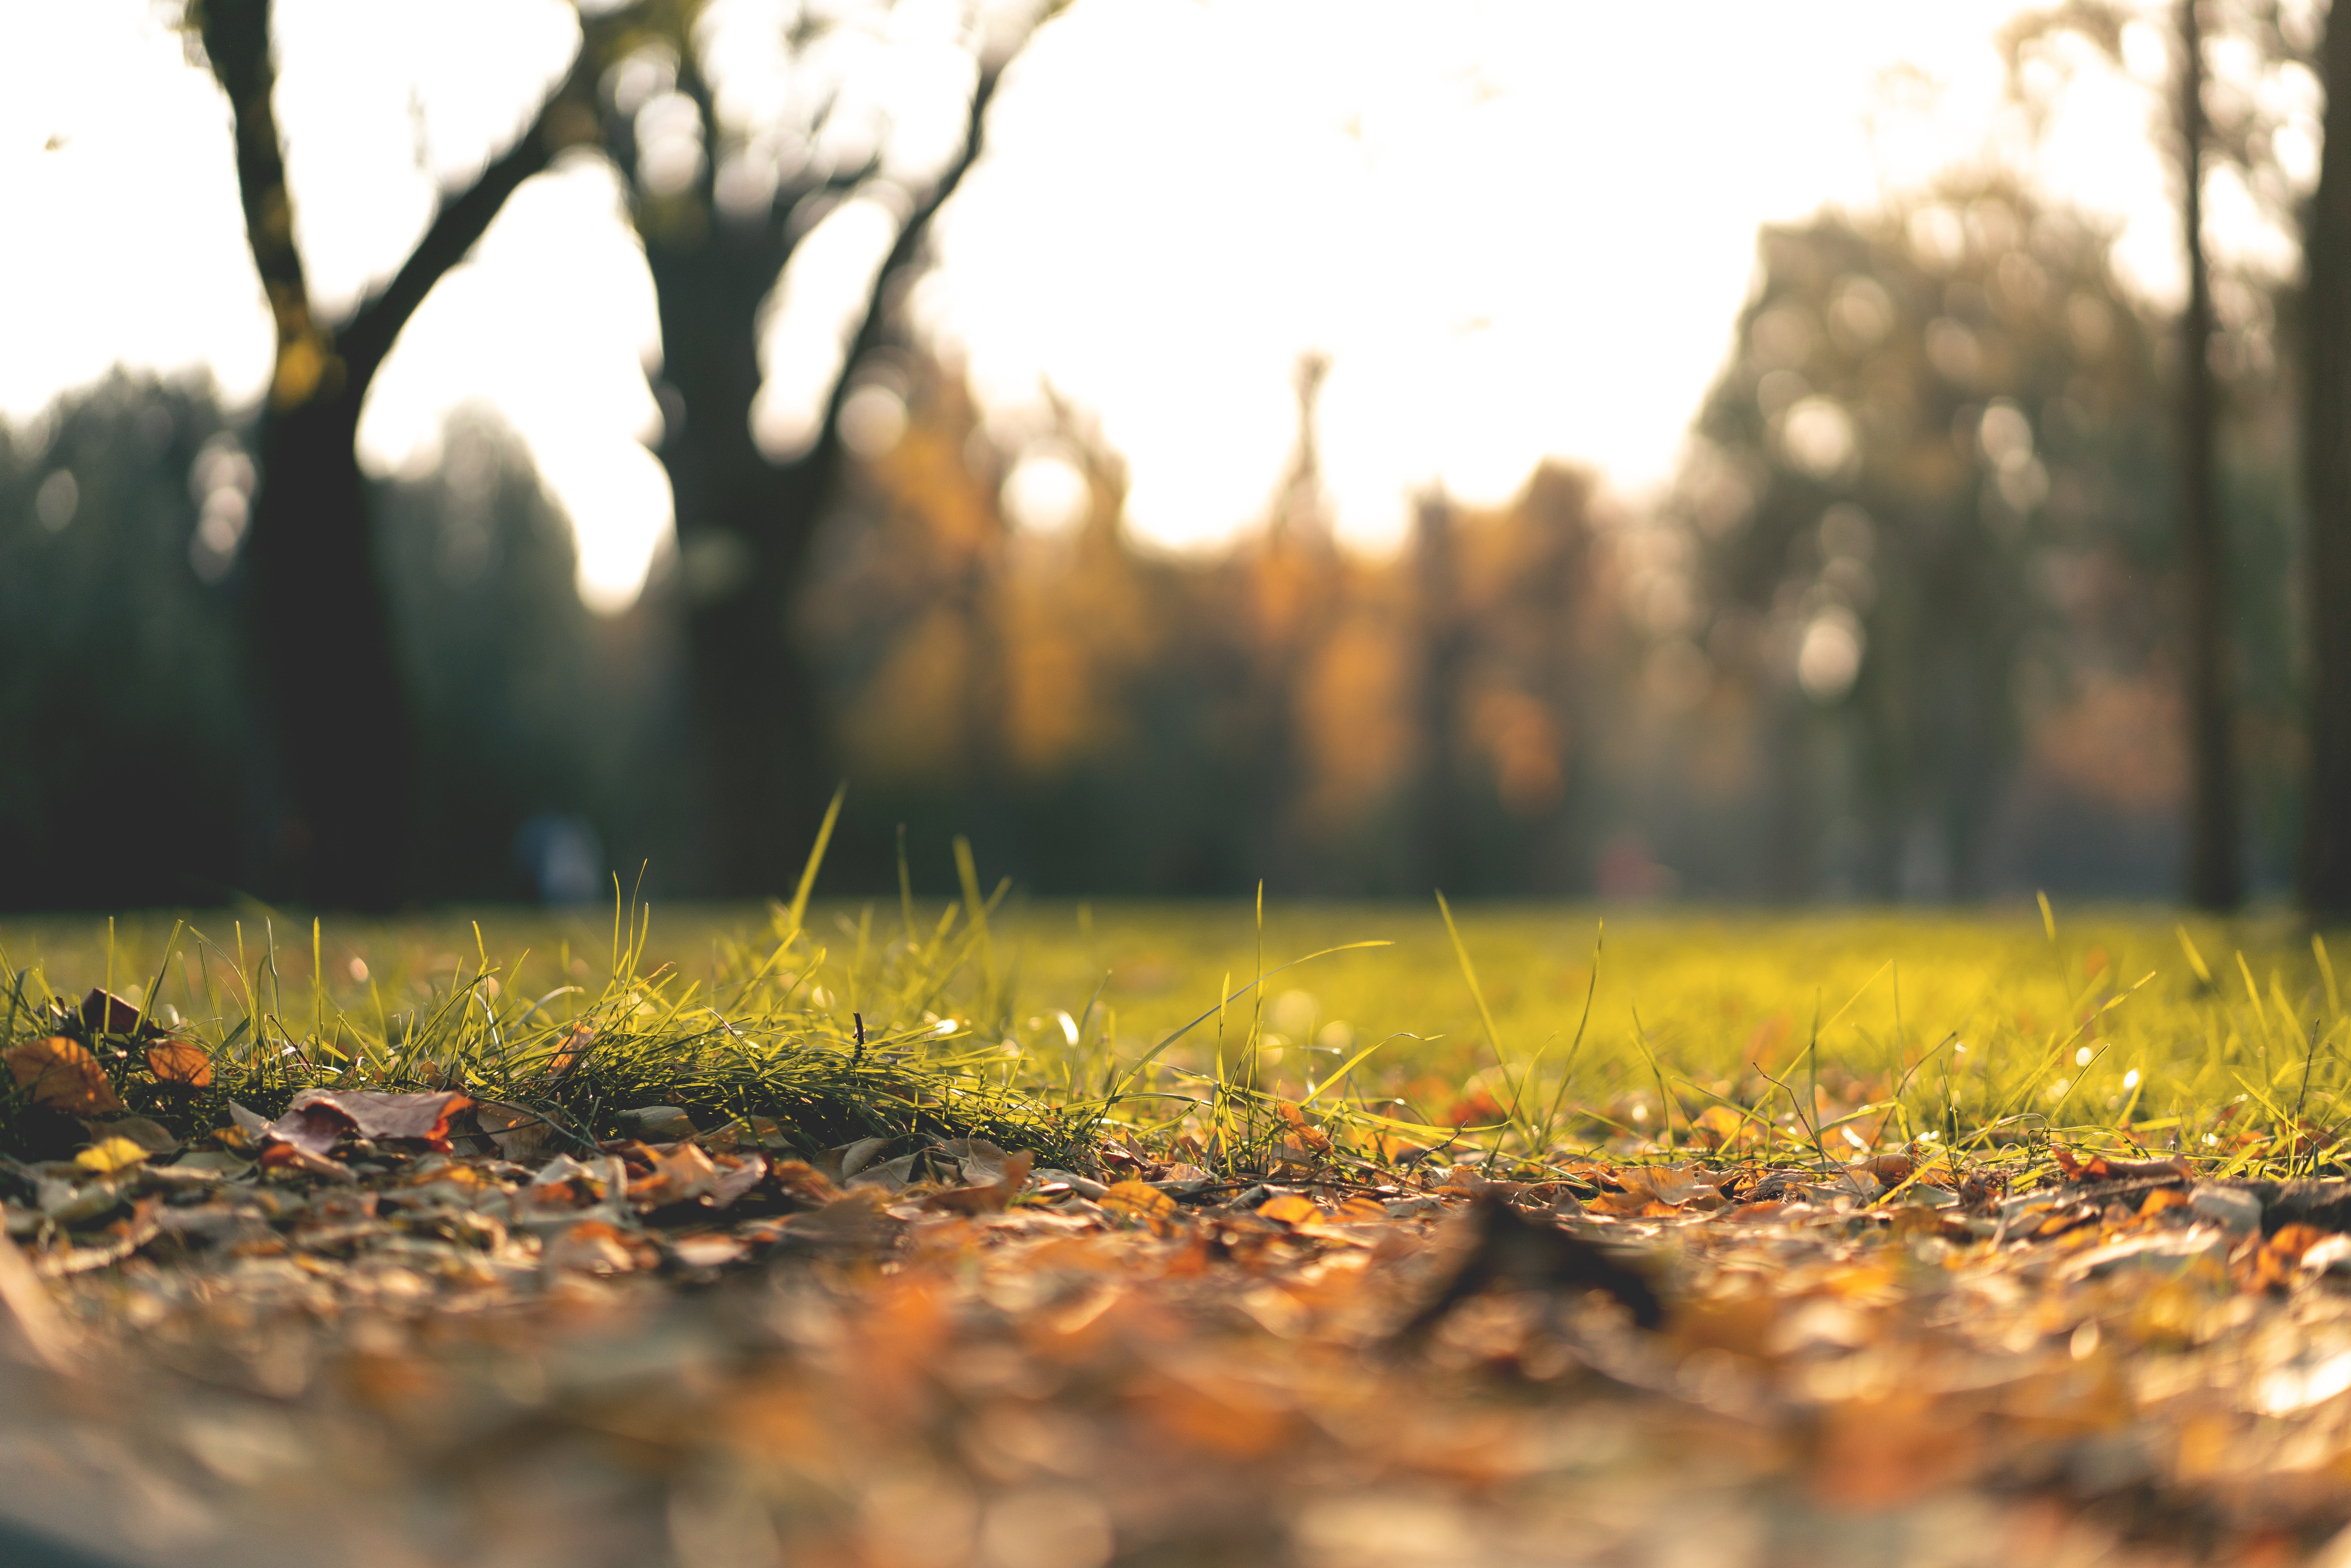 A selective focus image of autumn leaves on a grassy lawn 